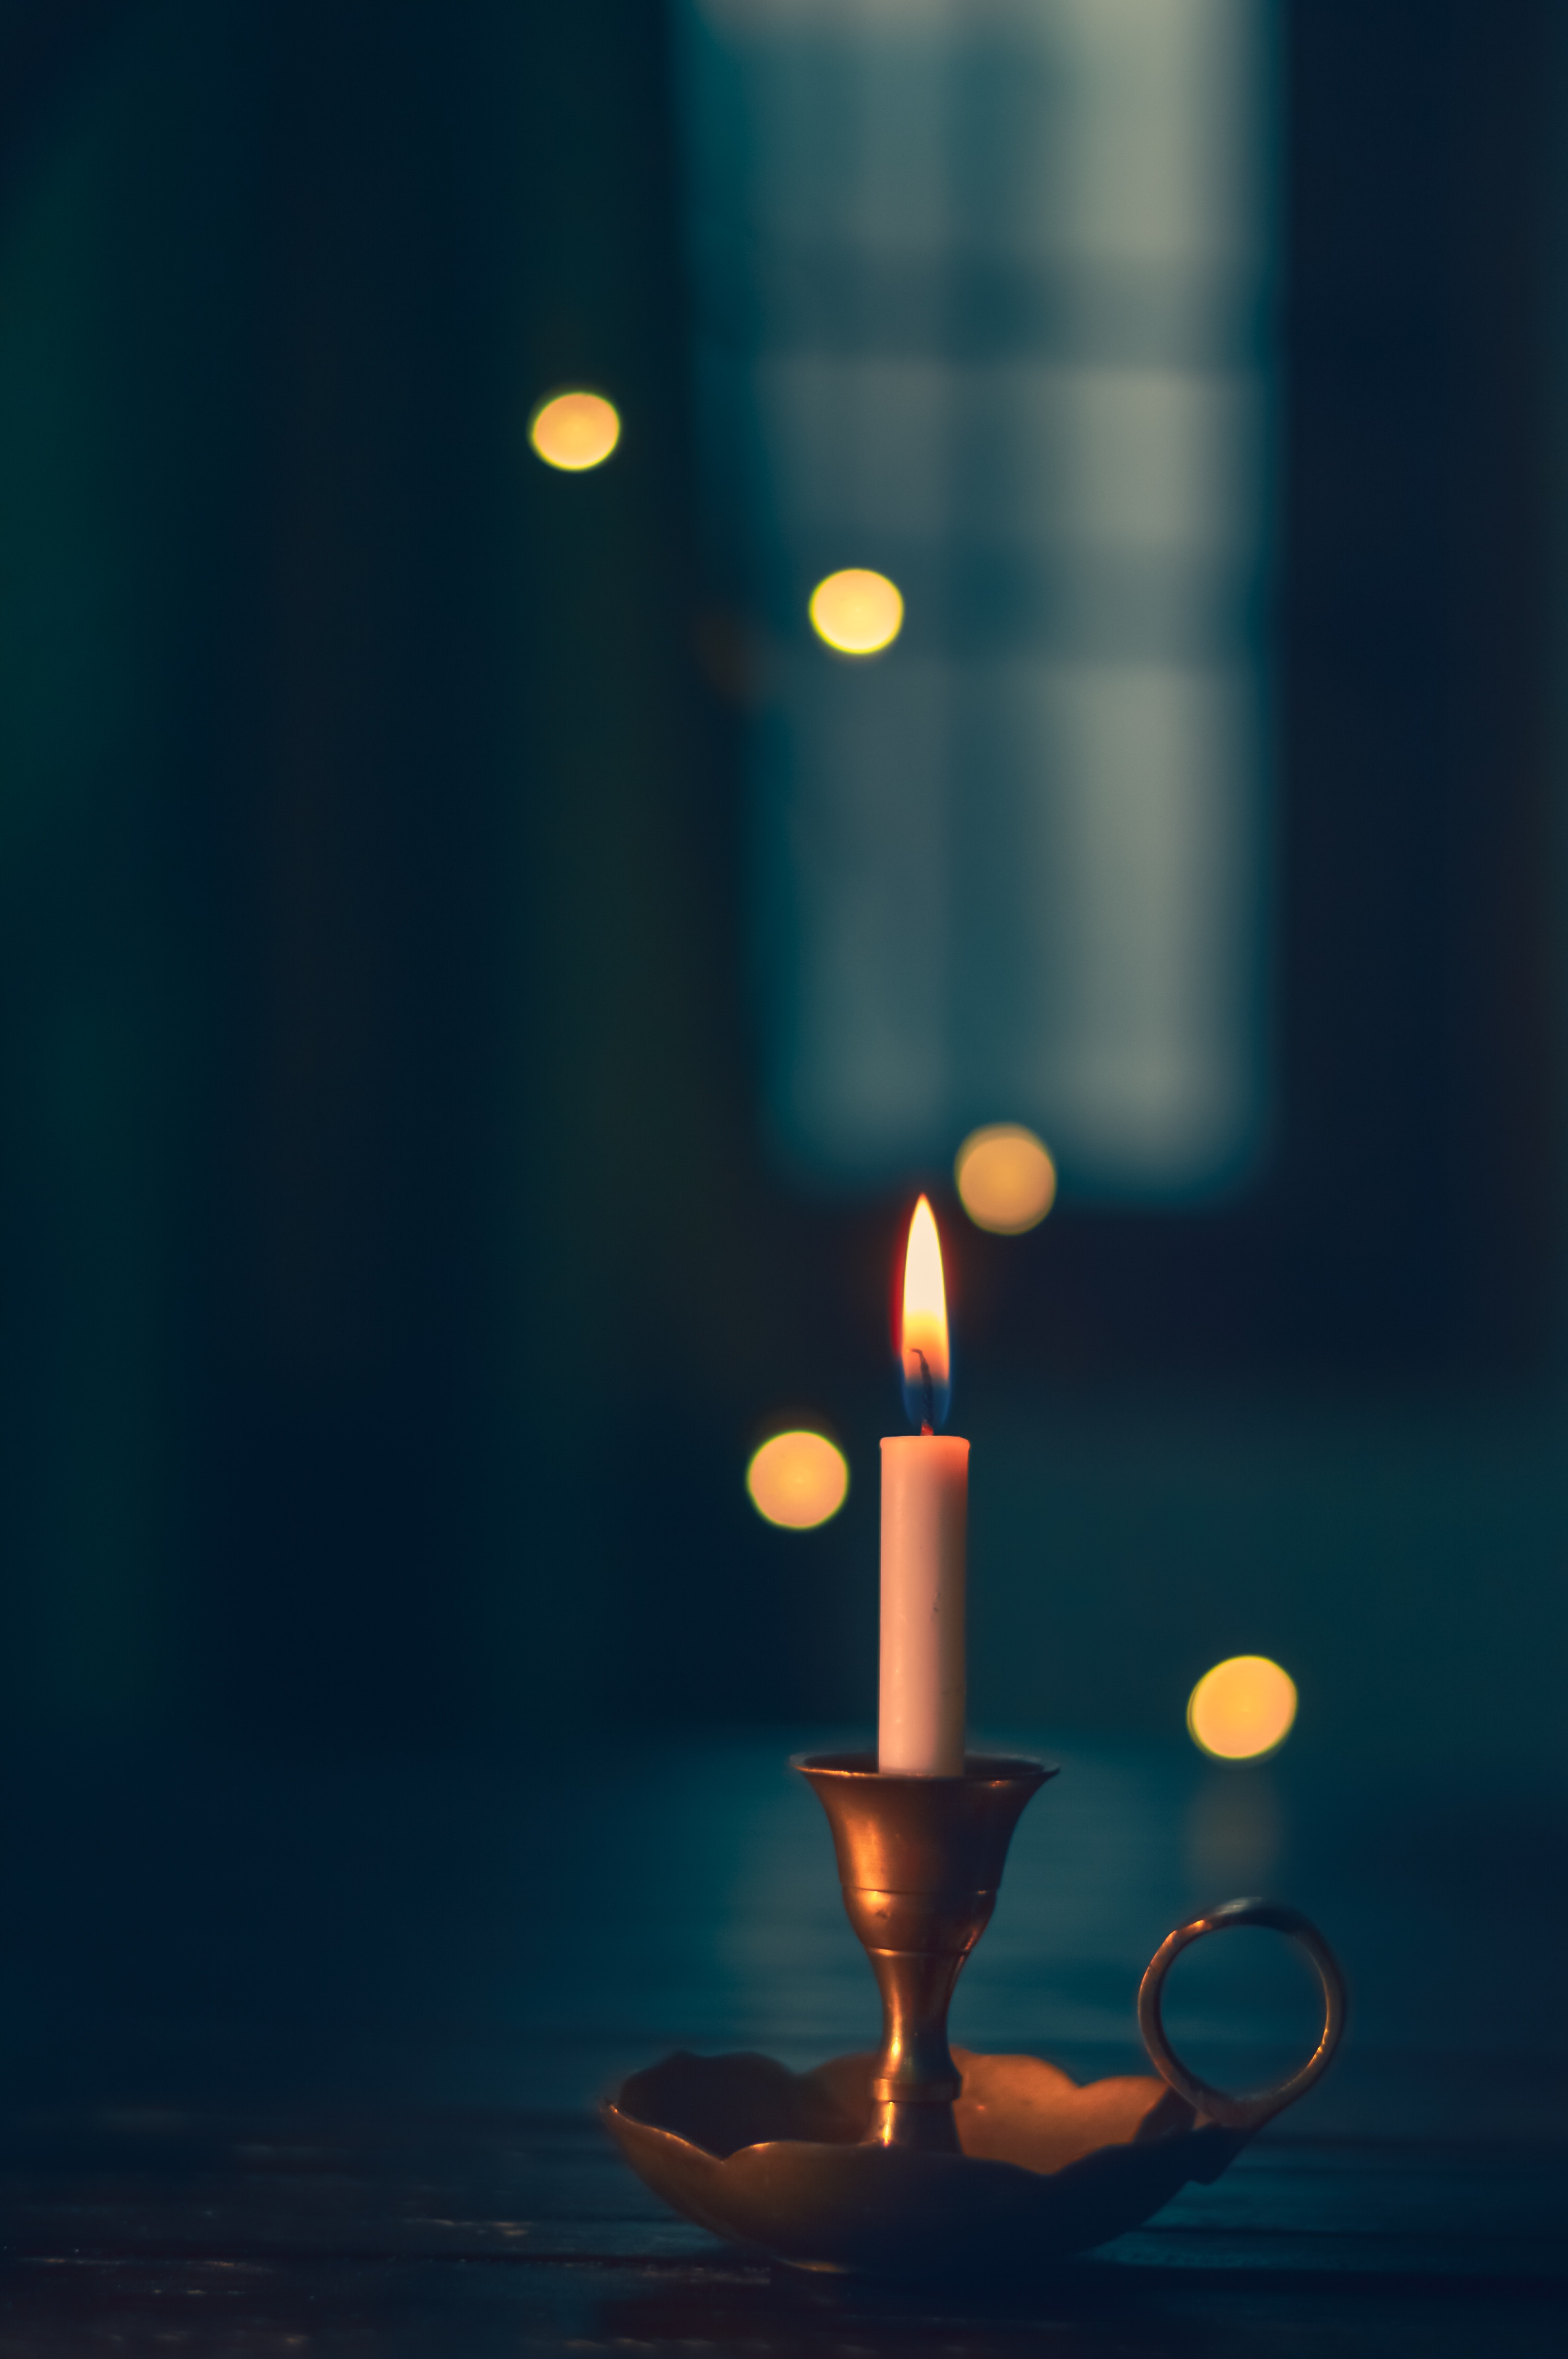 blur, miscellanea, candle, fire, wax, miscellaneous, smooth, wick, candlestick Full HD